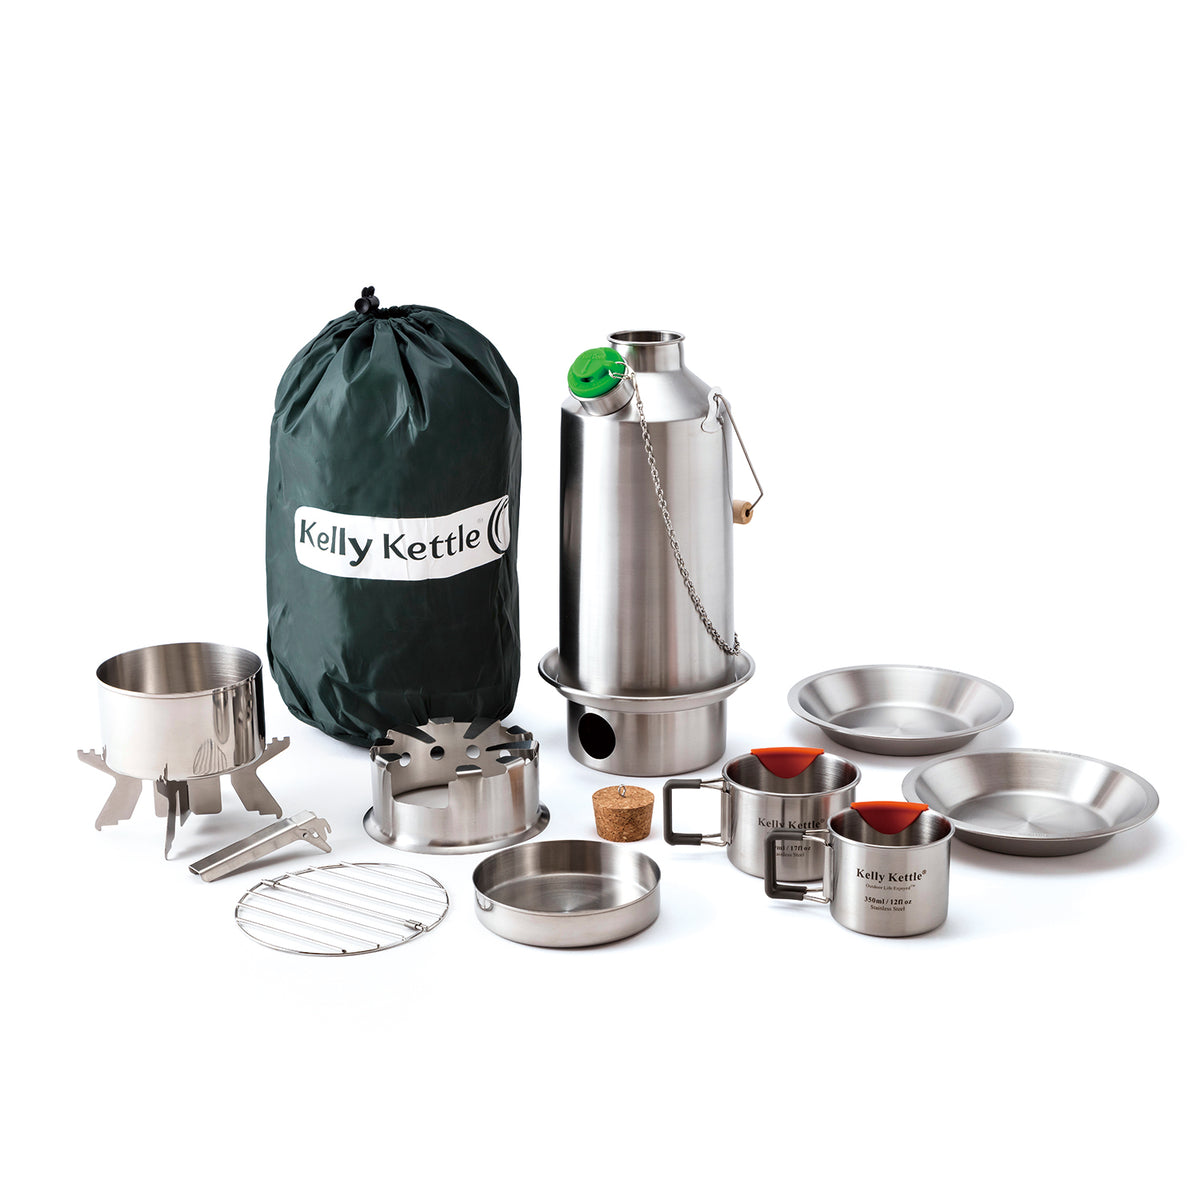 KELLY KETTLE BASECAMP ULTIMATE KIT 1.6L STAINLESS